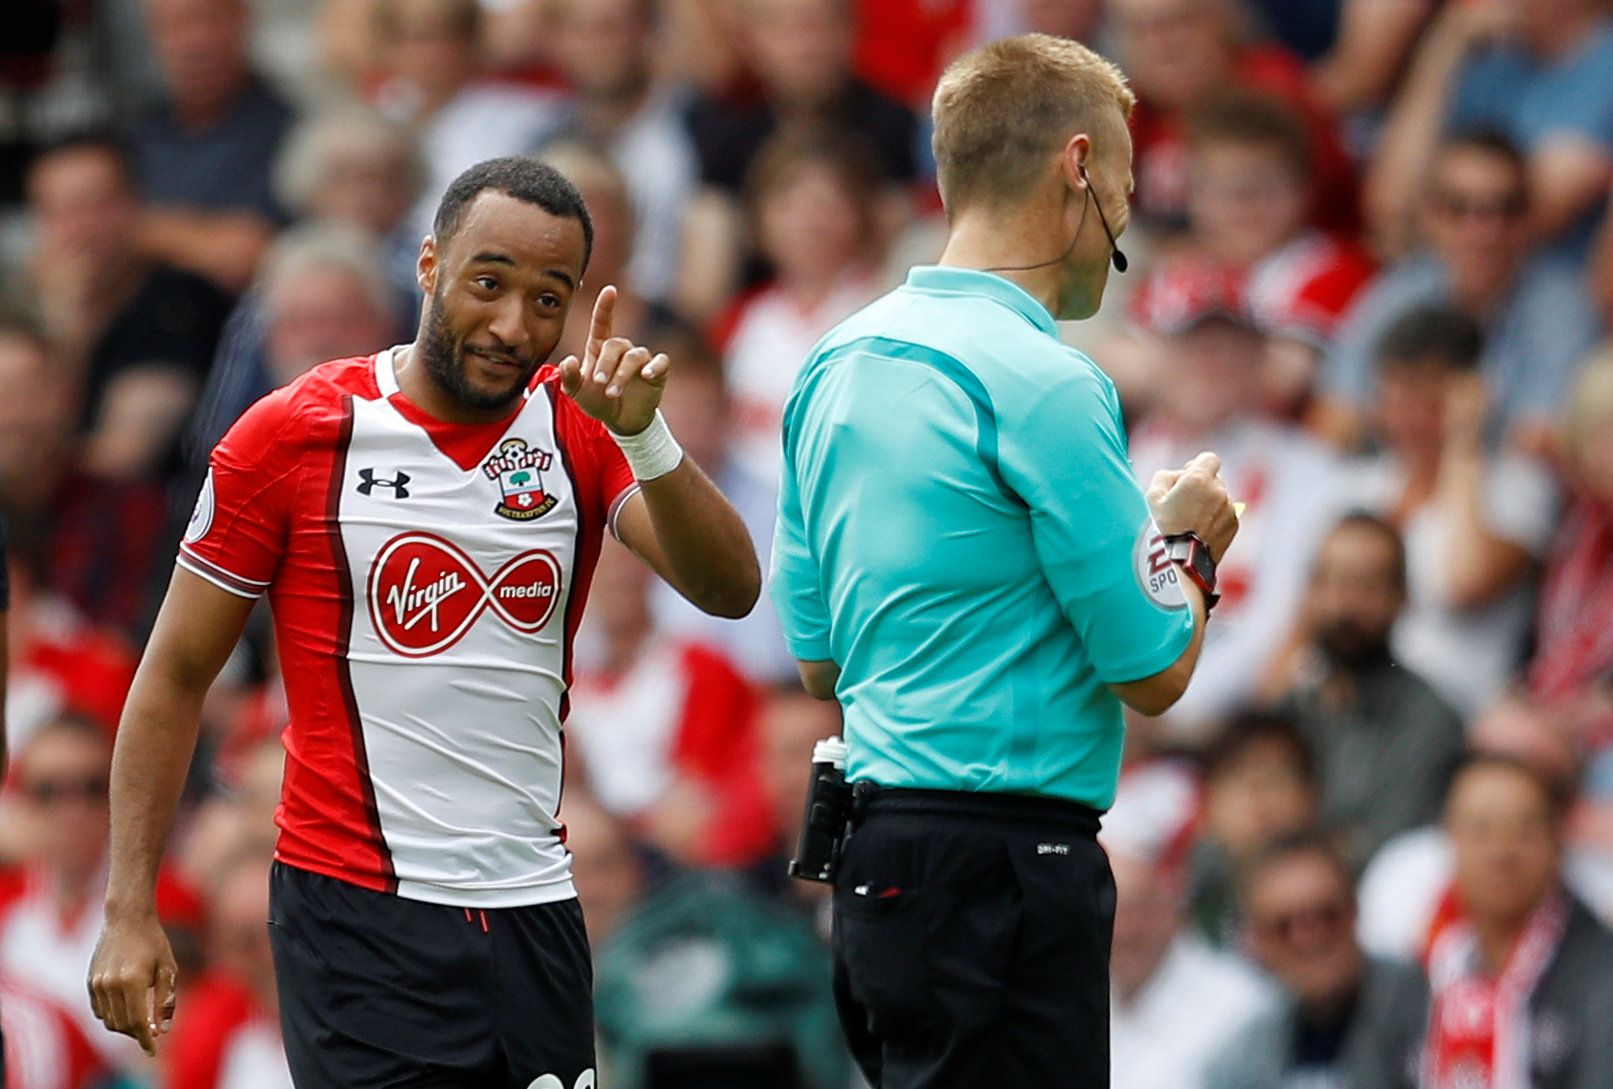 Football Soccer - Premier League - Southampton vs Swansea City - Southampton, Britain - August 12, 2017   Southampton's Nathan Redmond is shown a yellow card by referee Mike Jones   REUTERS/Peter Nicholls  EDITORIAL USE ONLY. No use with unauthorized audio, video, data, fixture lists, club/league logos or 